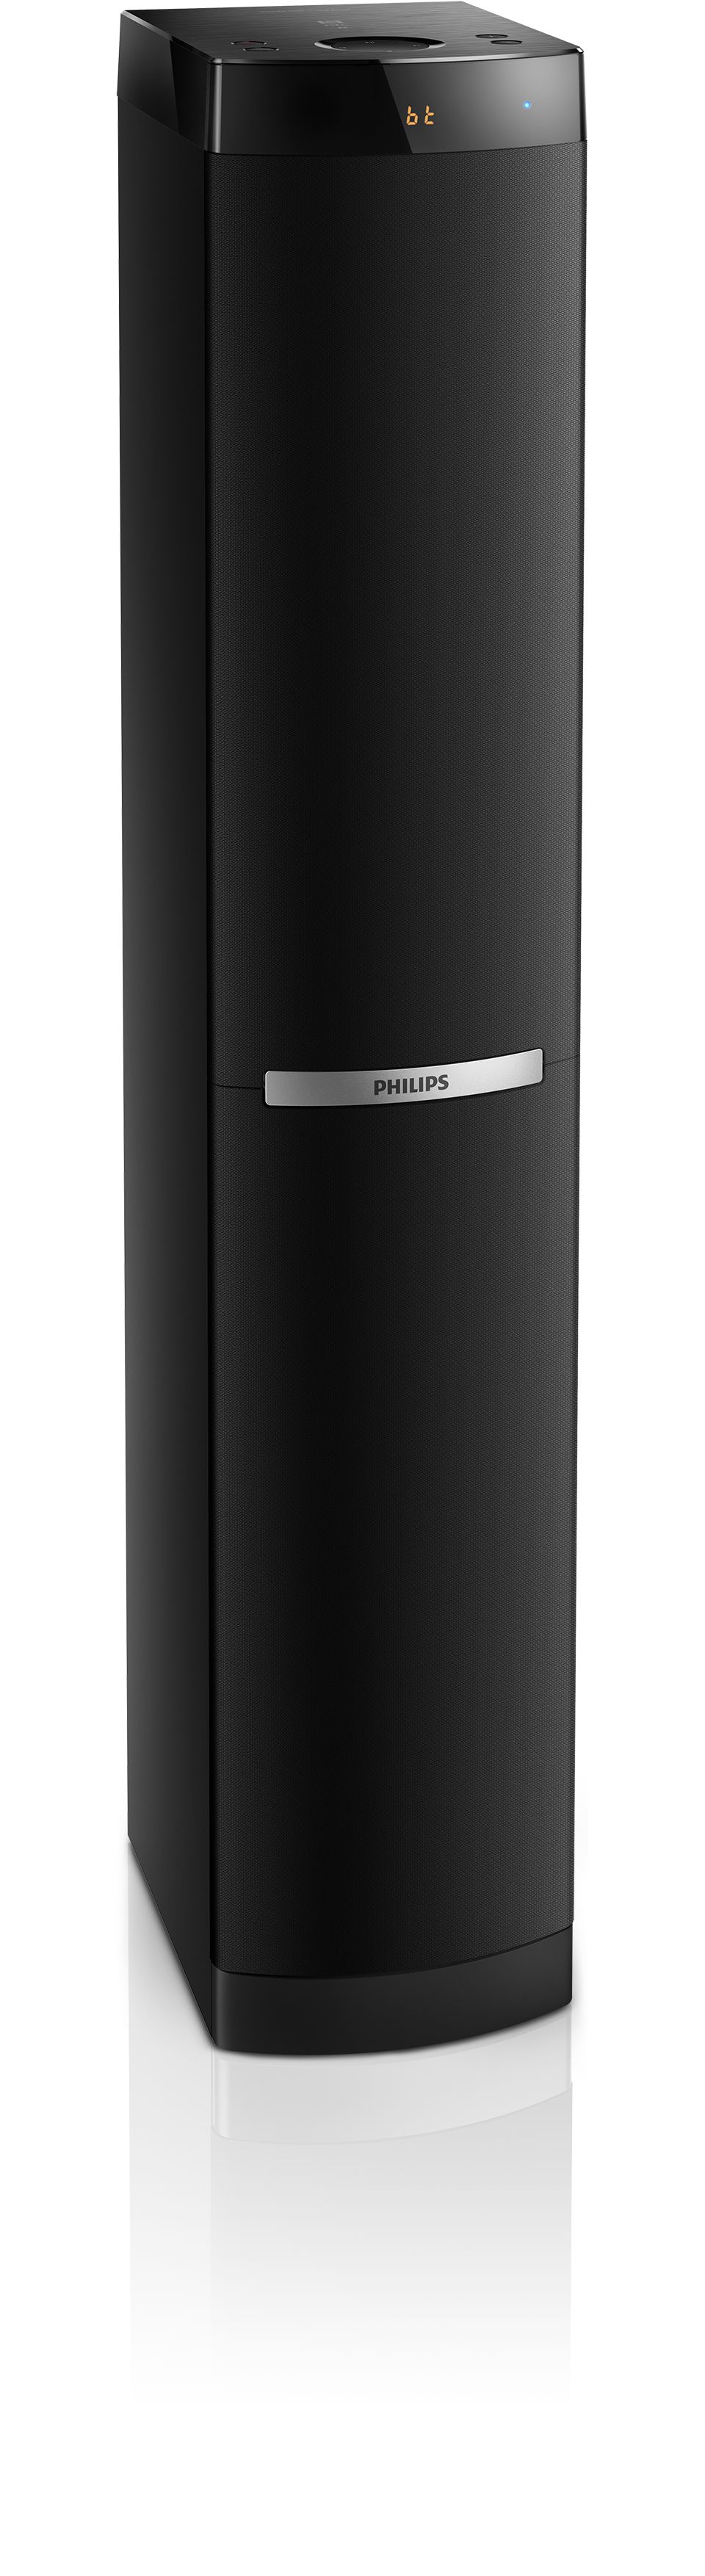 Micro music system BT2110/10 | Philips